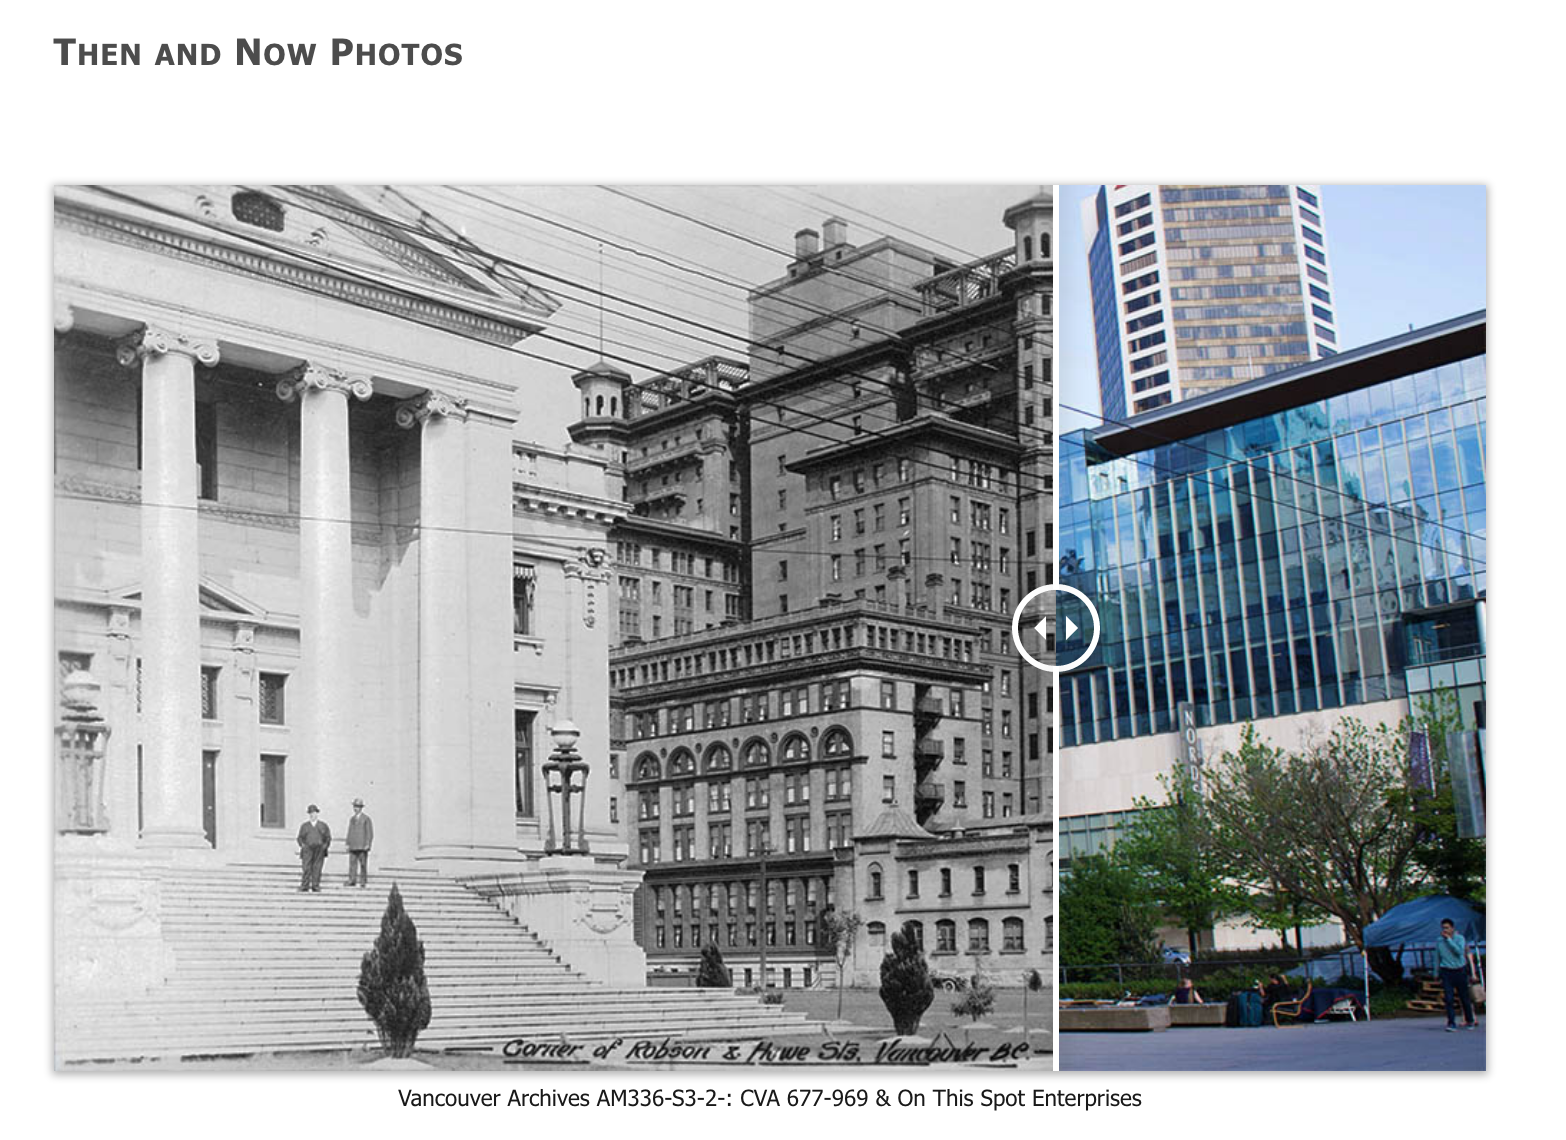 Vancouver - Then and Now Photos